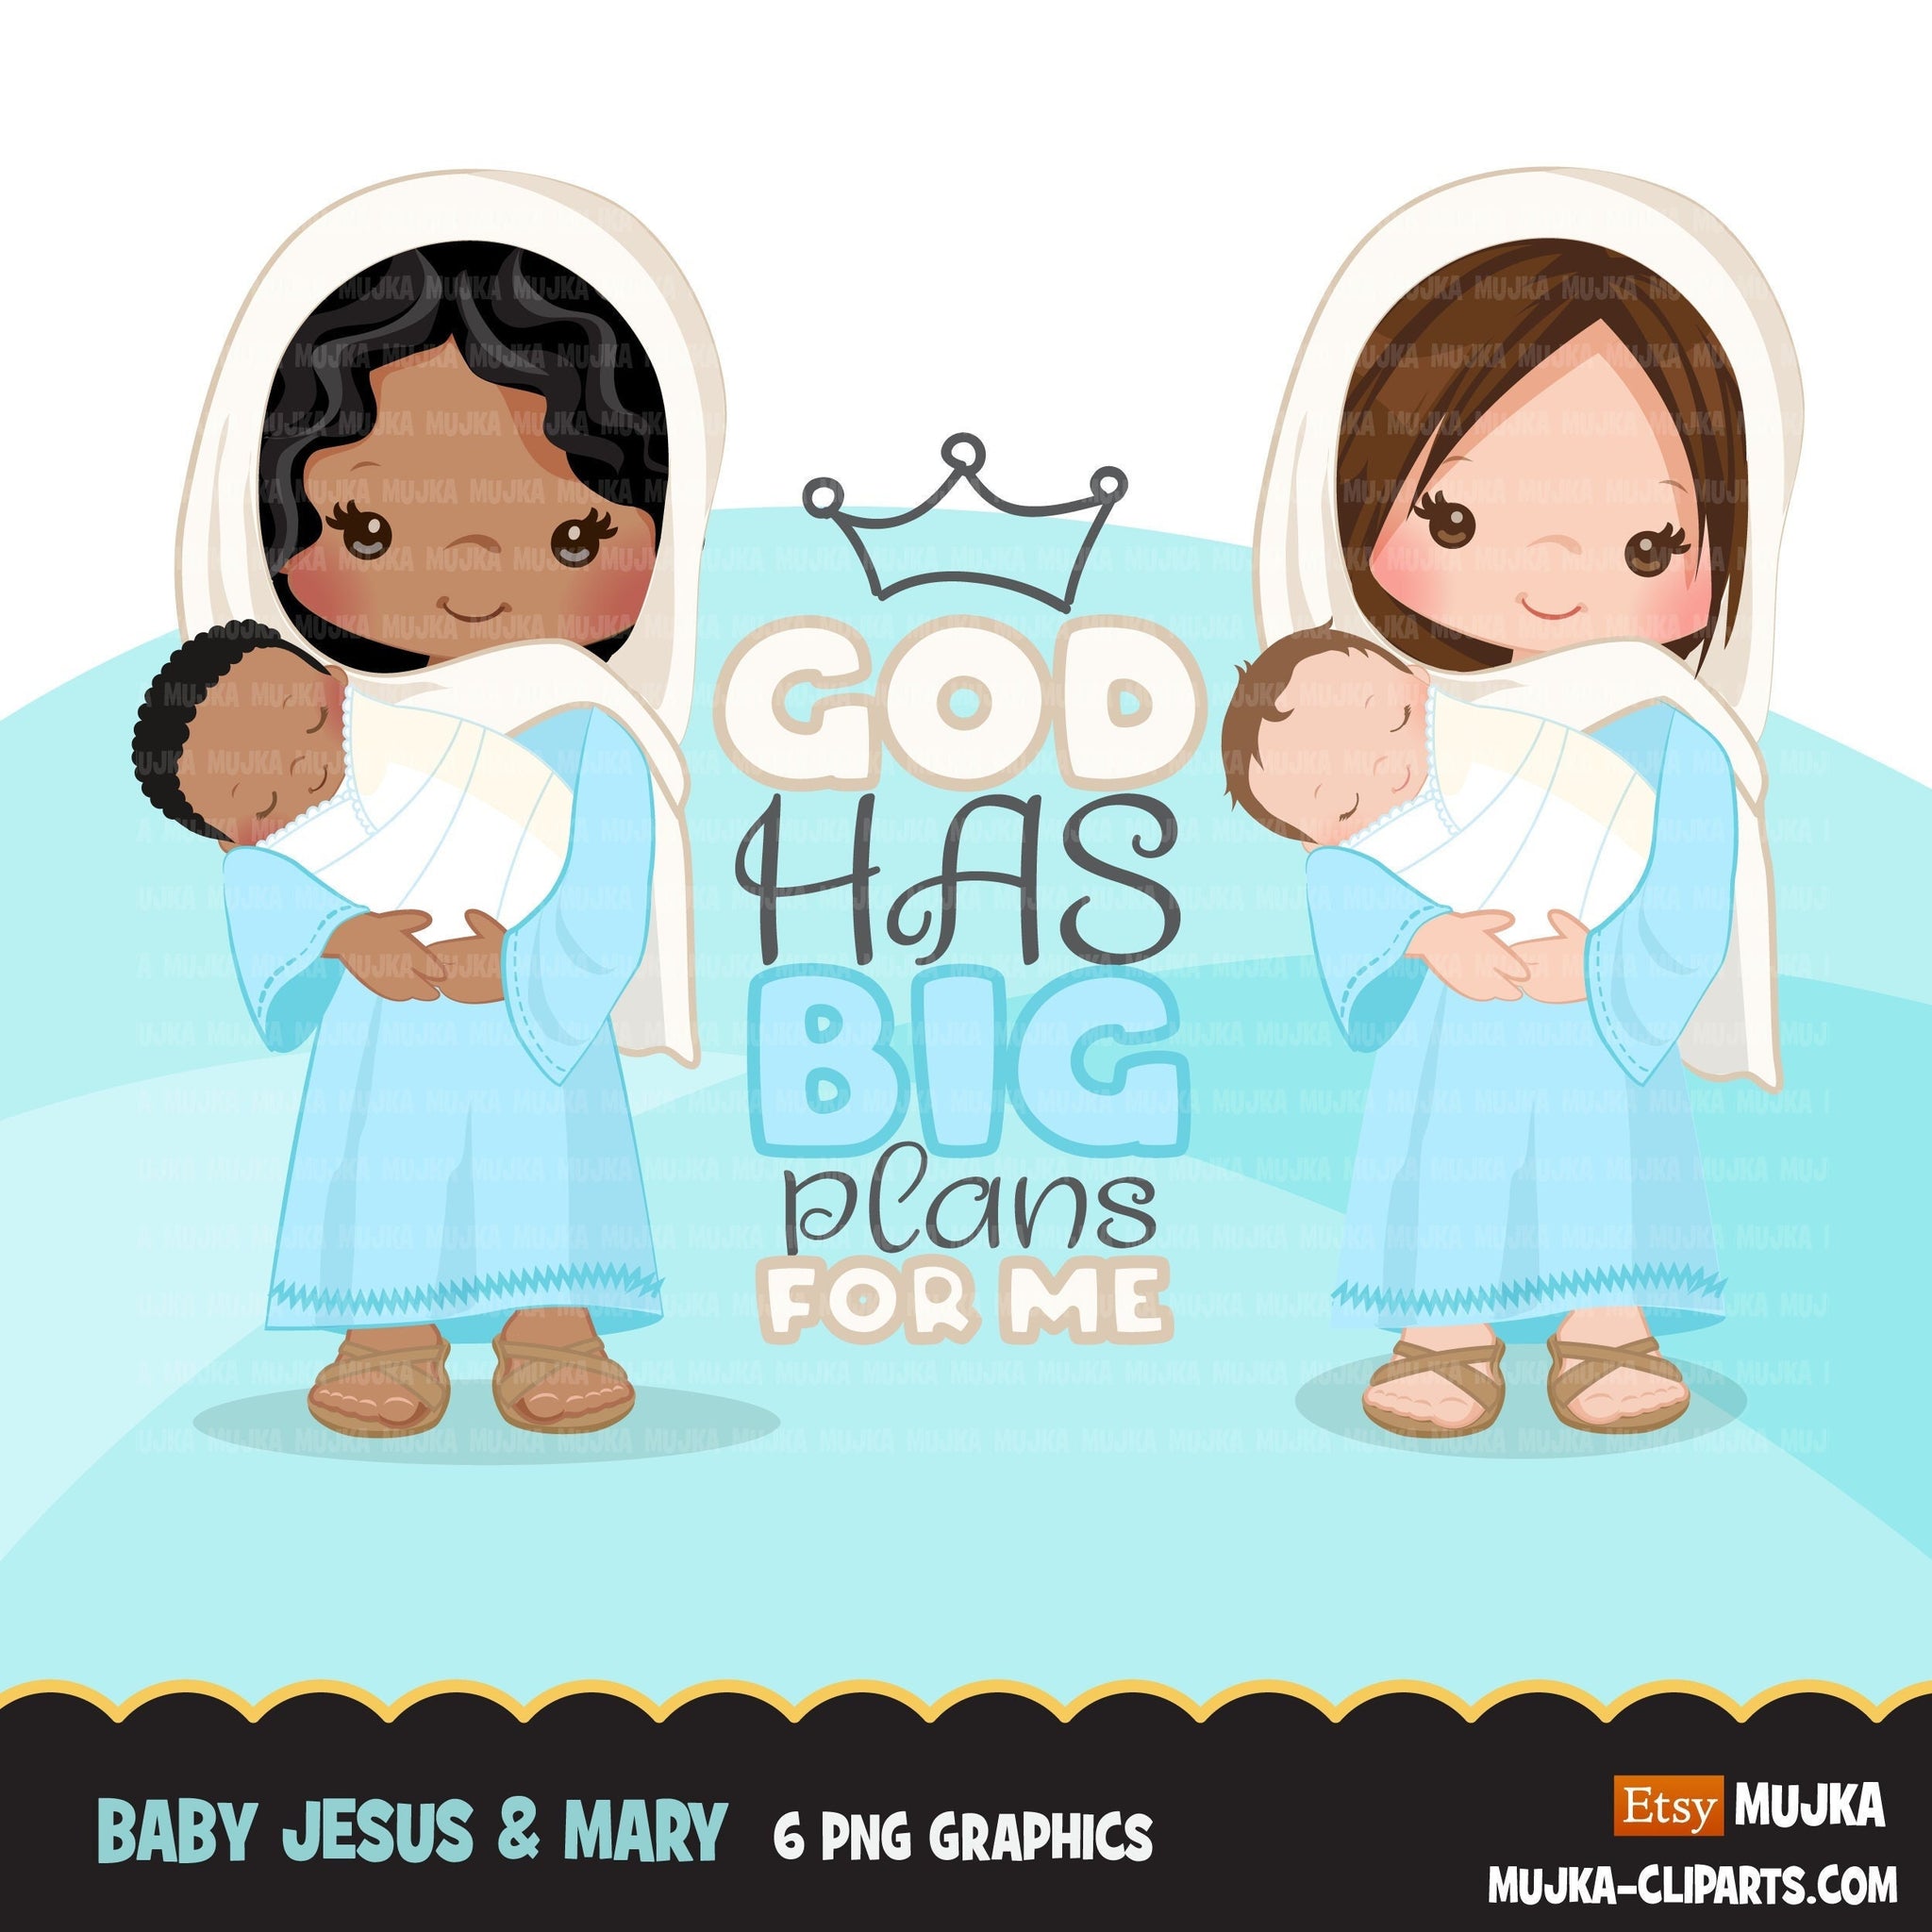 Nativity clipart, baby Jesus clipart, baby Jesus & Mary, Bible Graphics, Christian clipart, religious clipart, Christmas Clipart, Jesus png